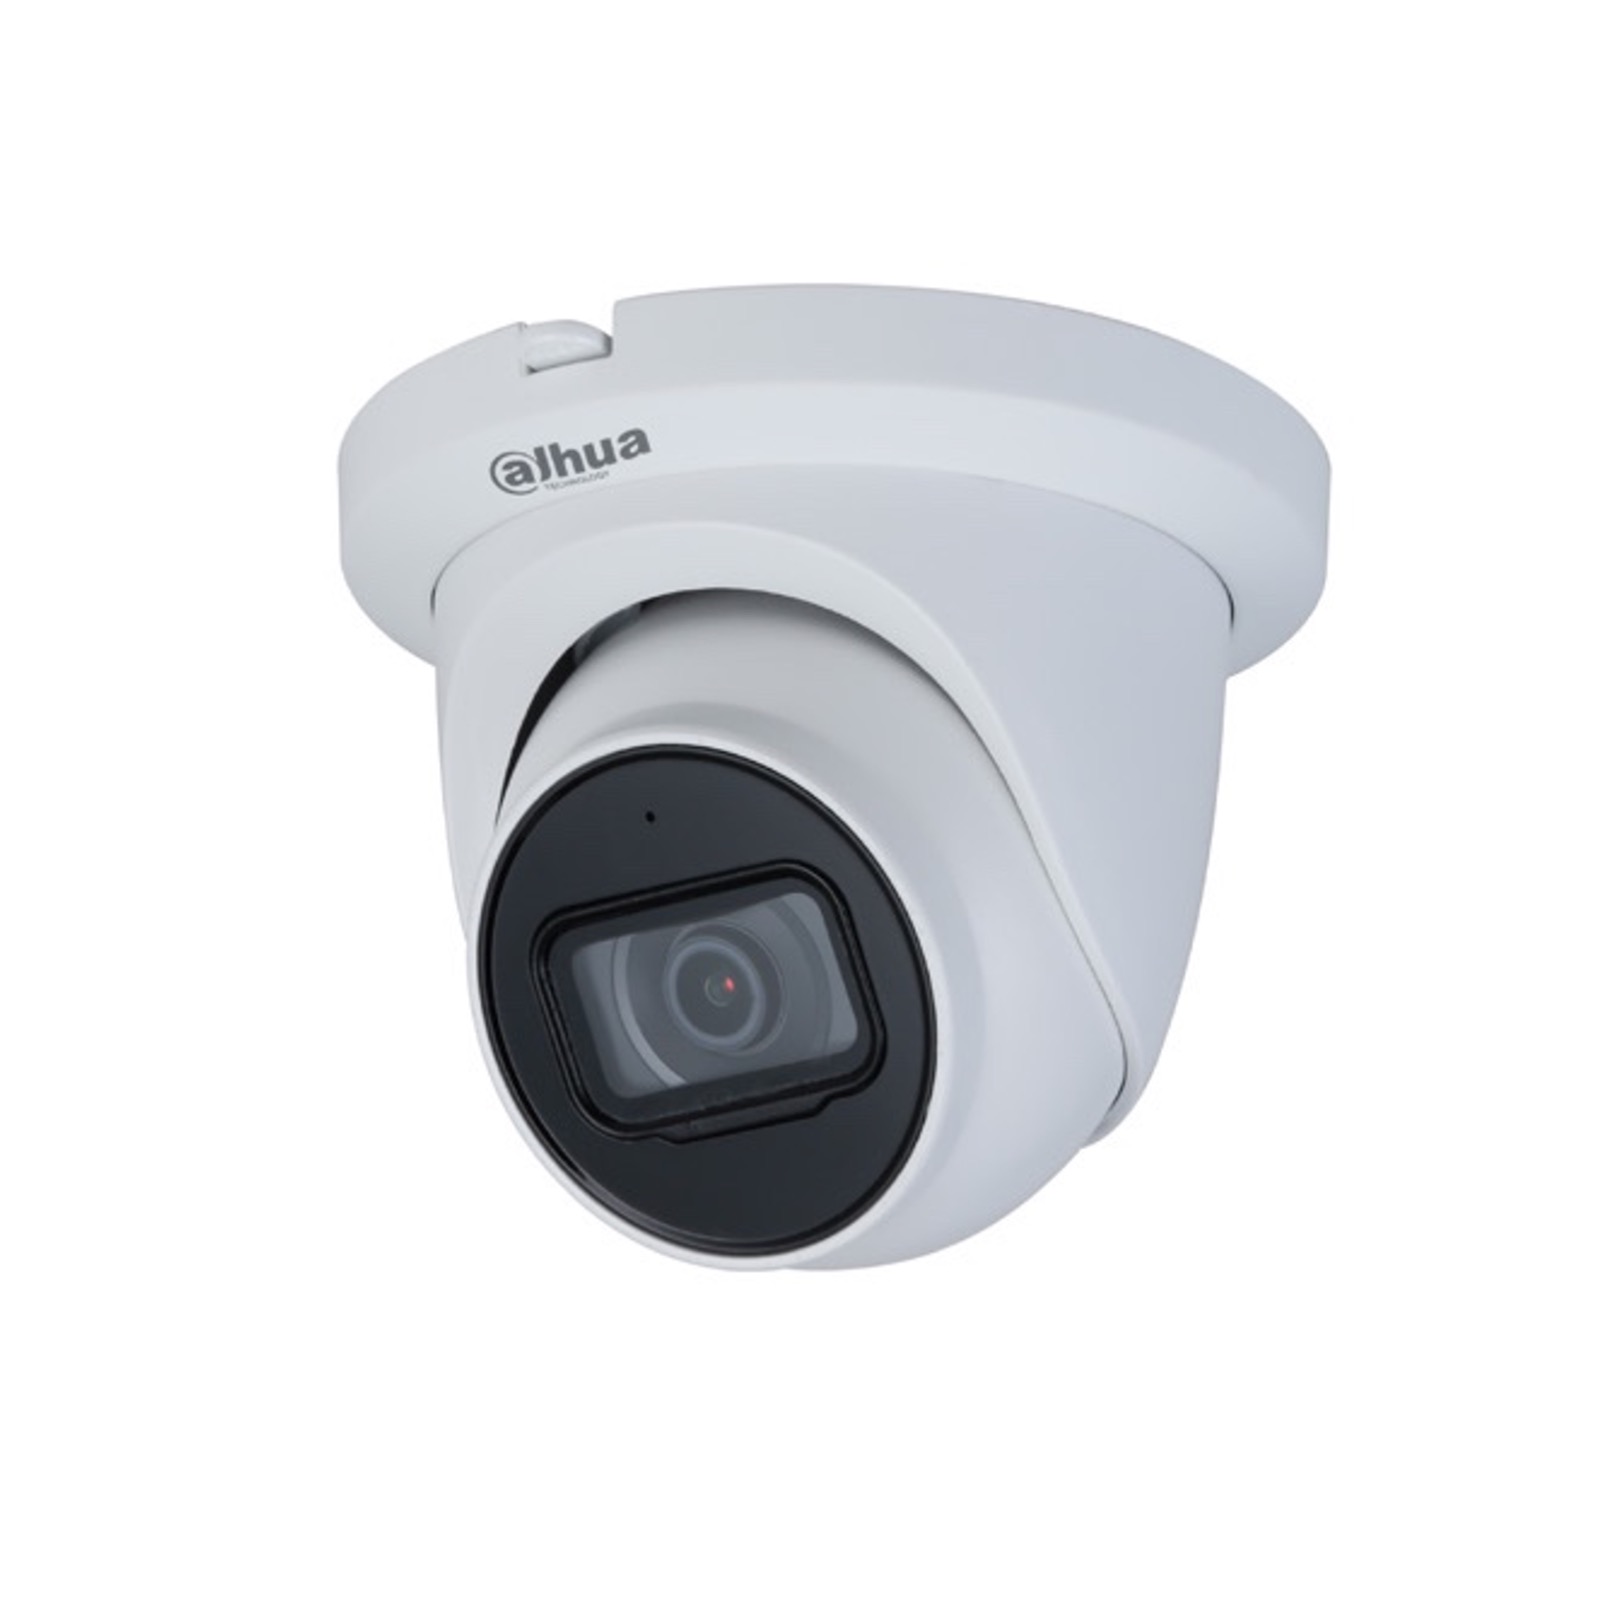 DAHUA-2851 | Dahua fixed dome 4 in 1 PRO series with 60 m Smart IR for outdoor use. 1/2.7